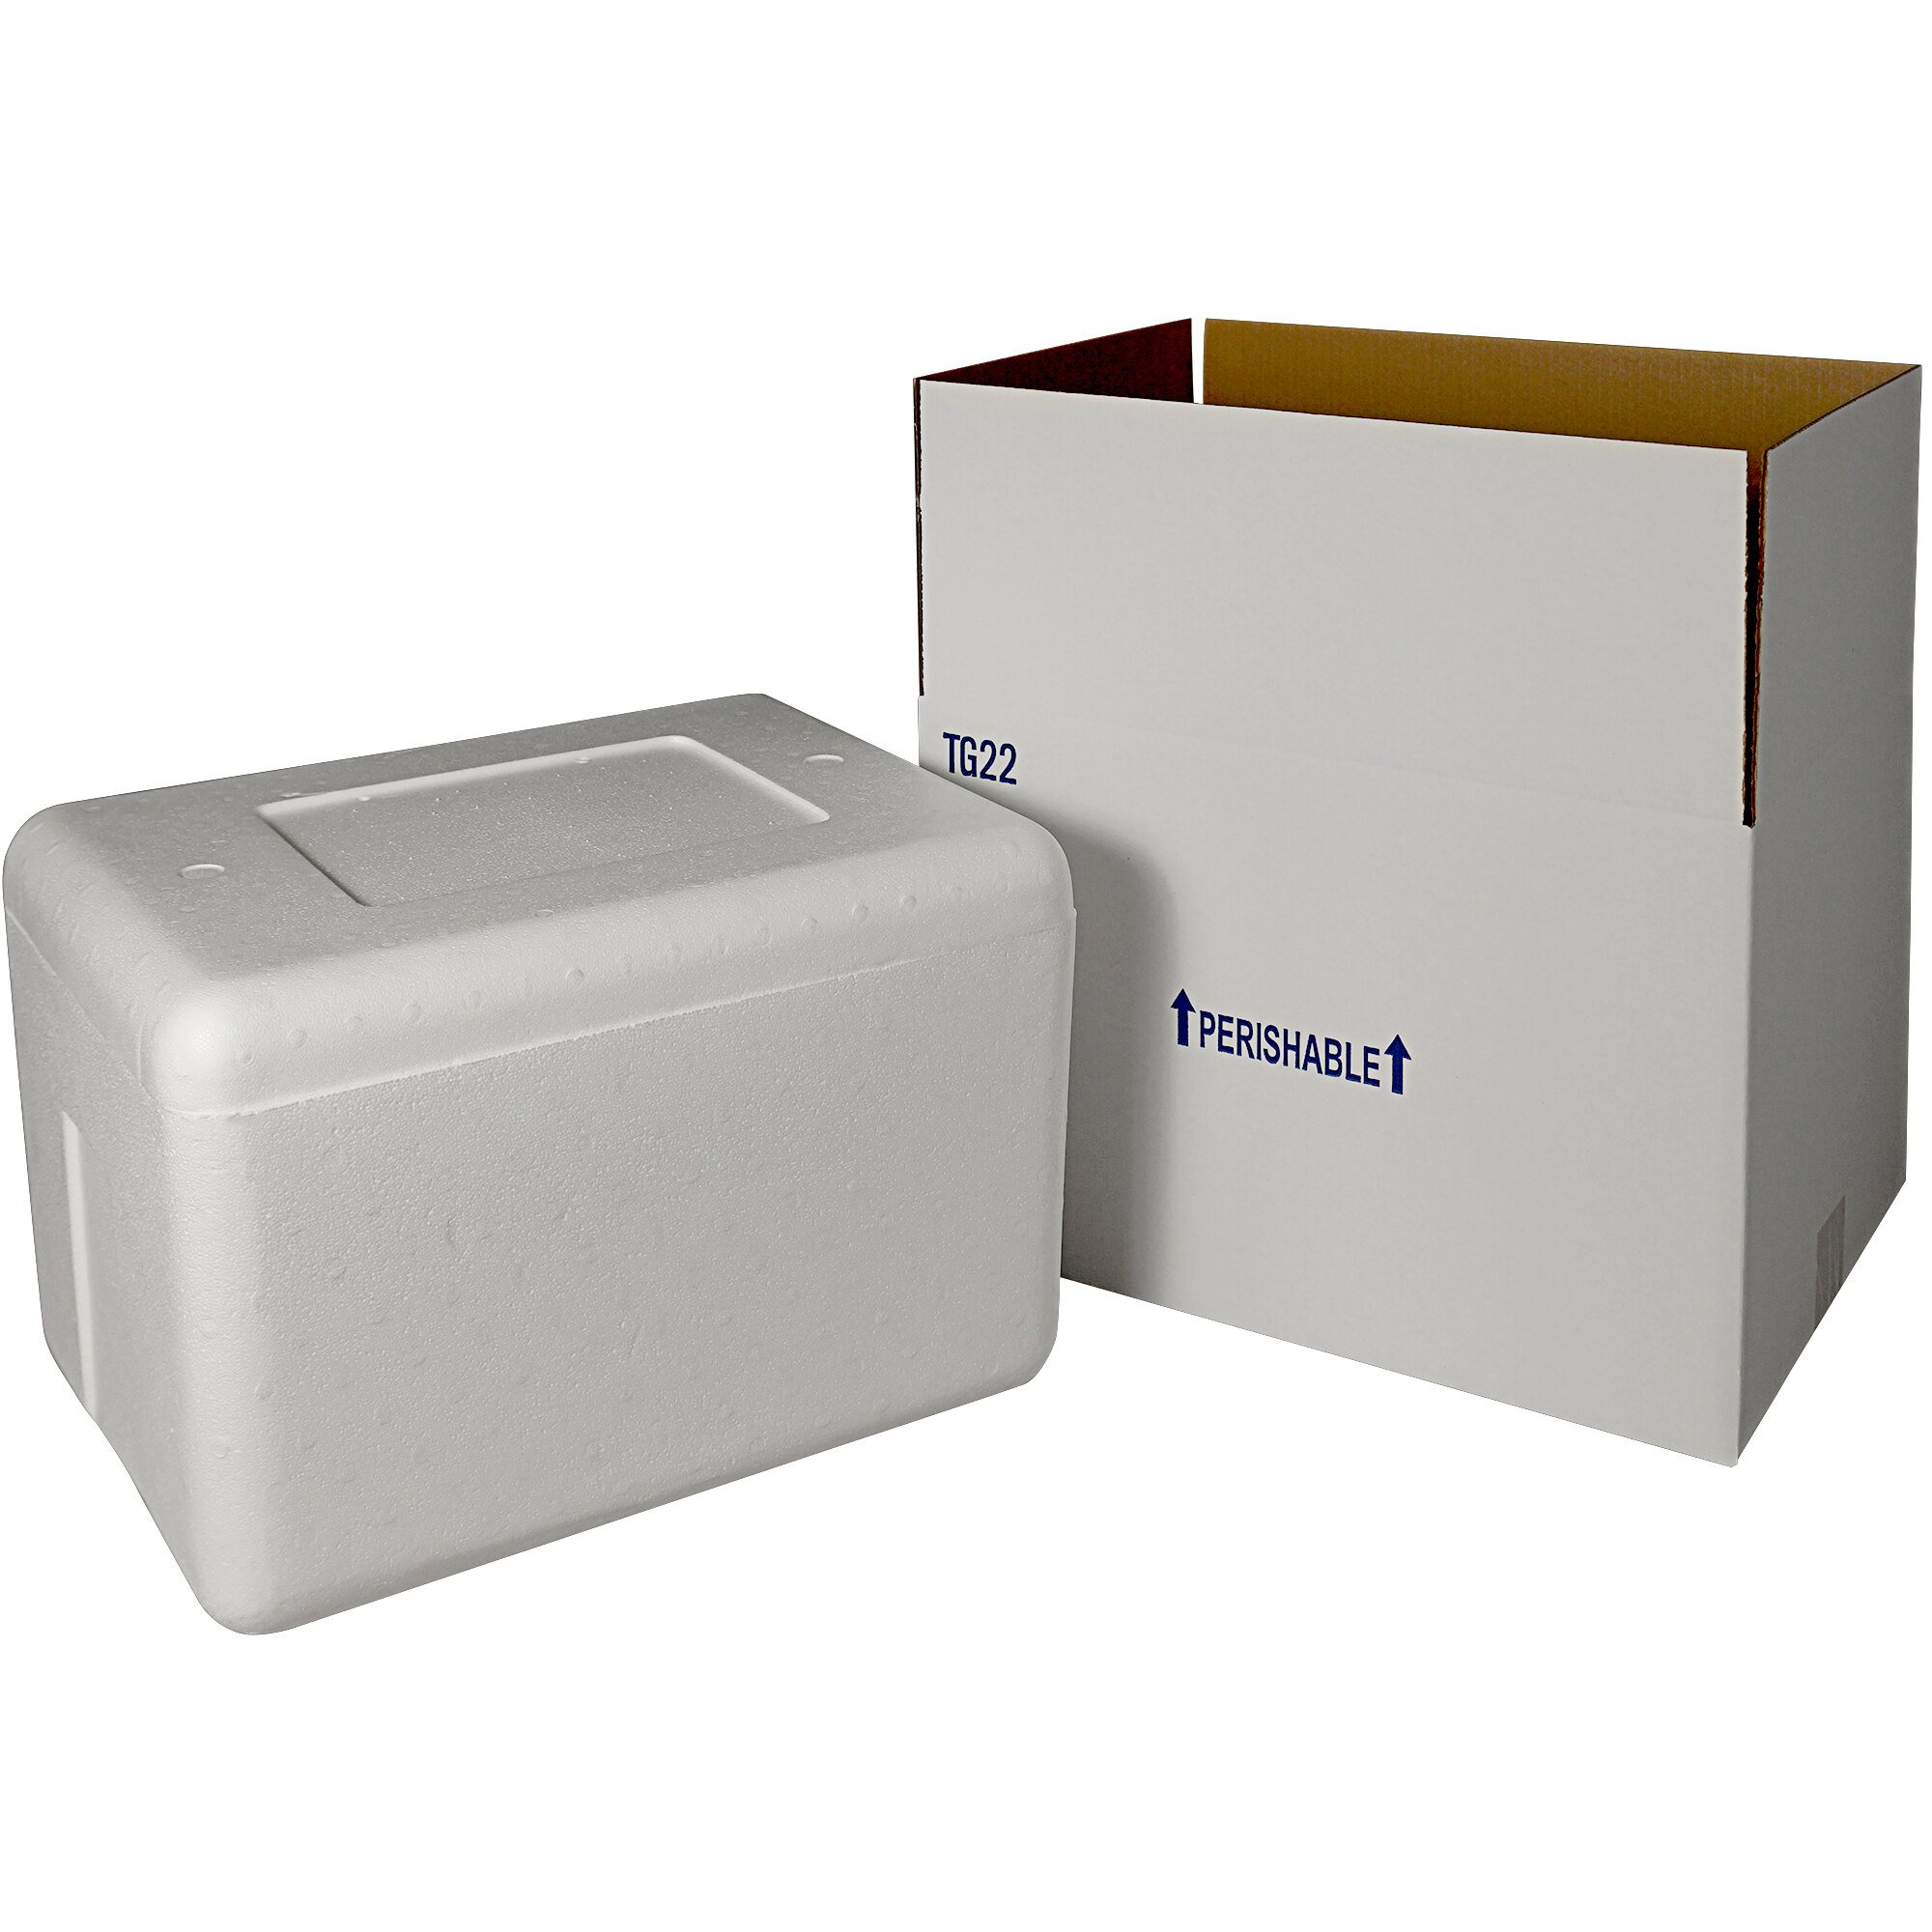 18 X 12 34 X 11 18 Insulated Foam Cooler With Shipping Box 1 12